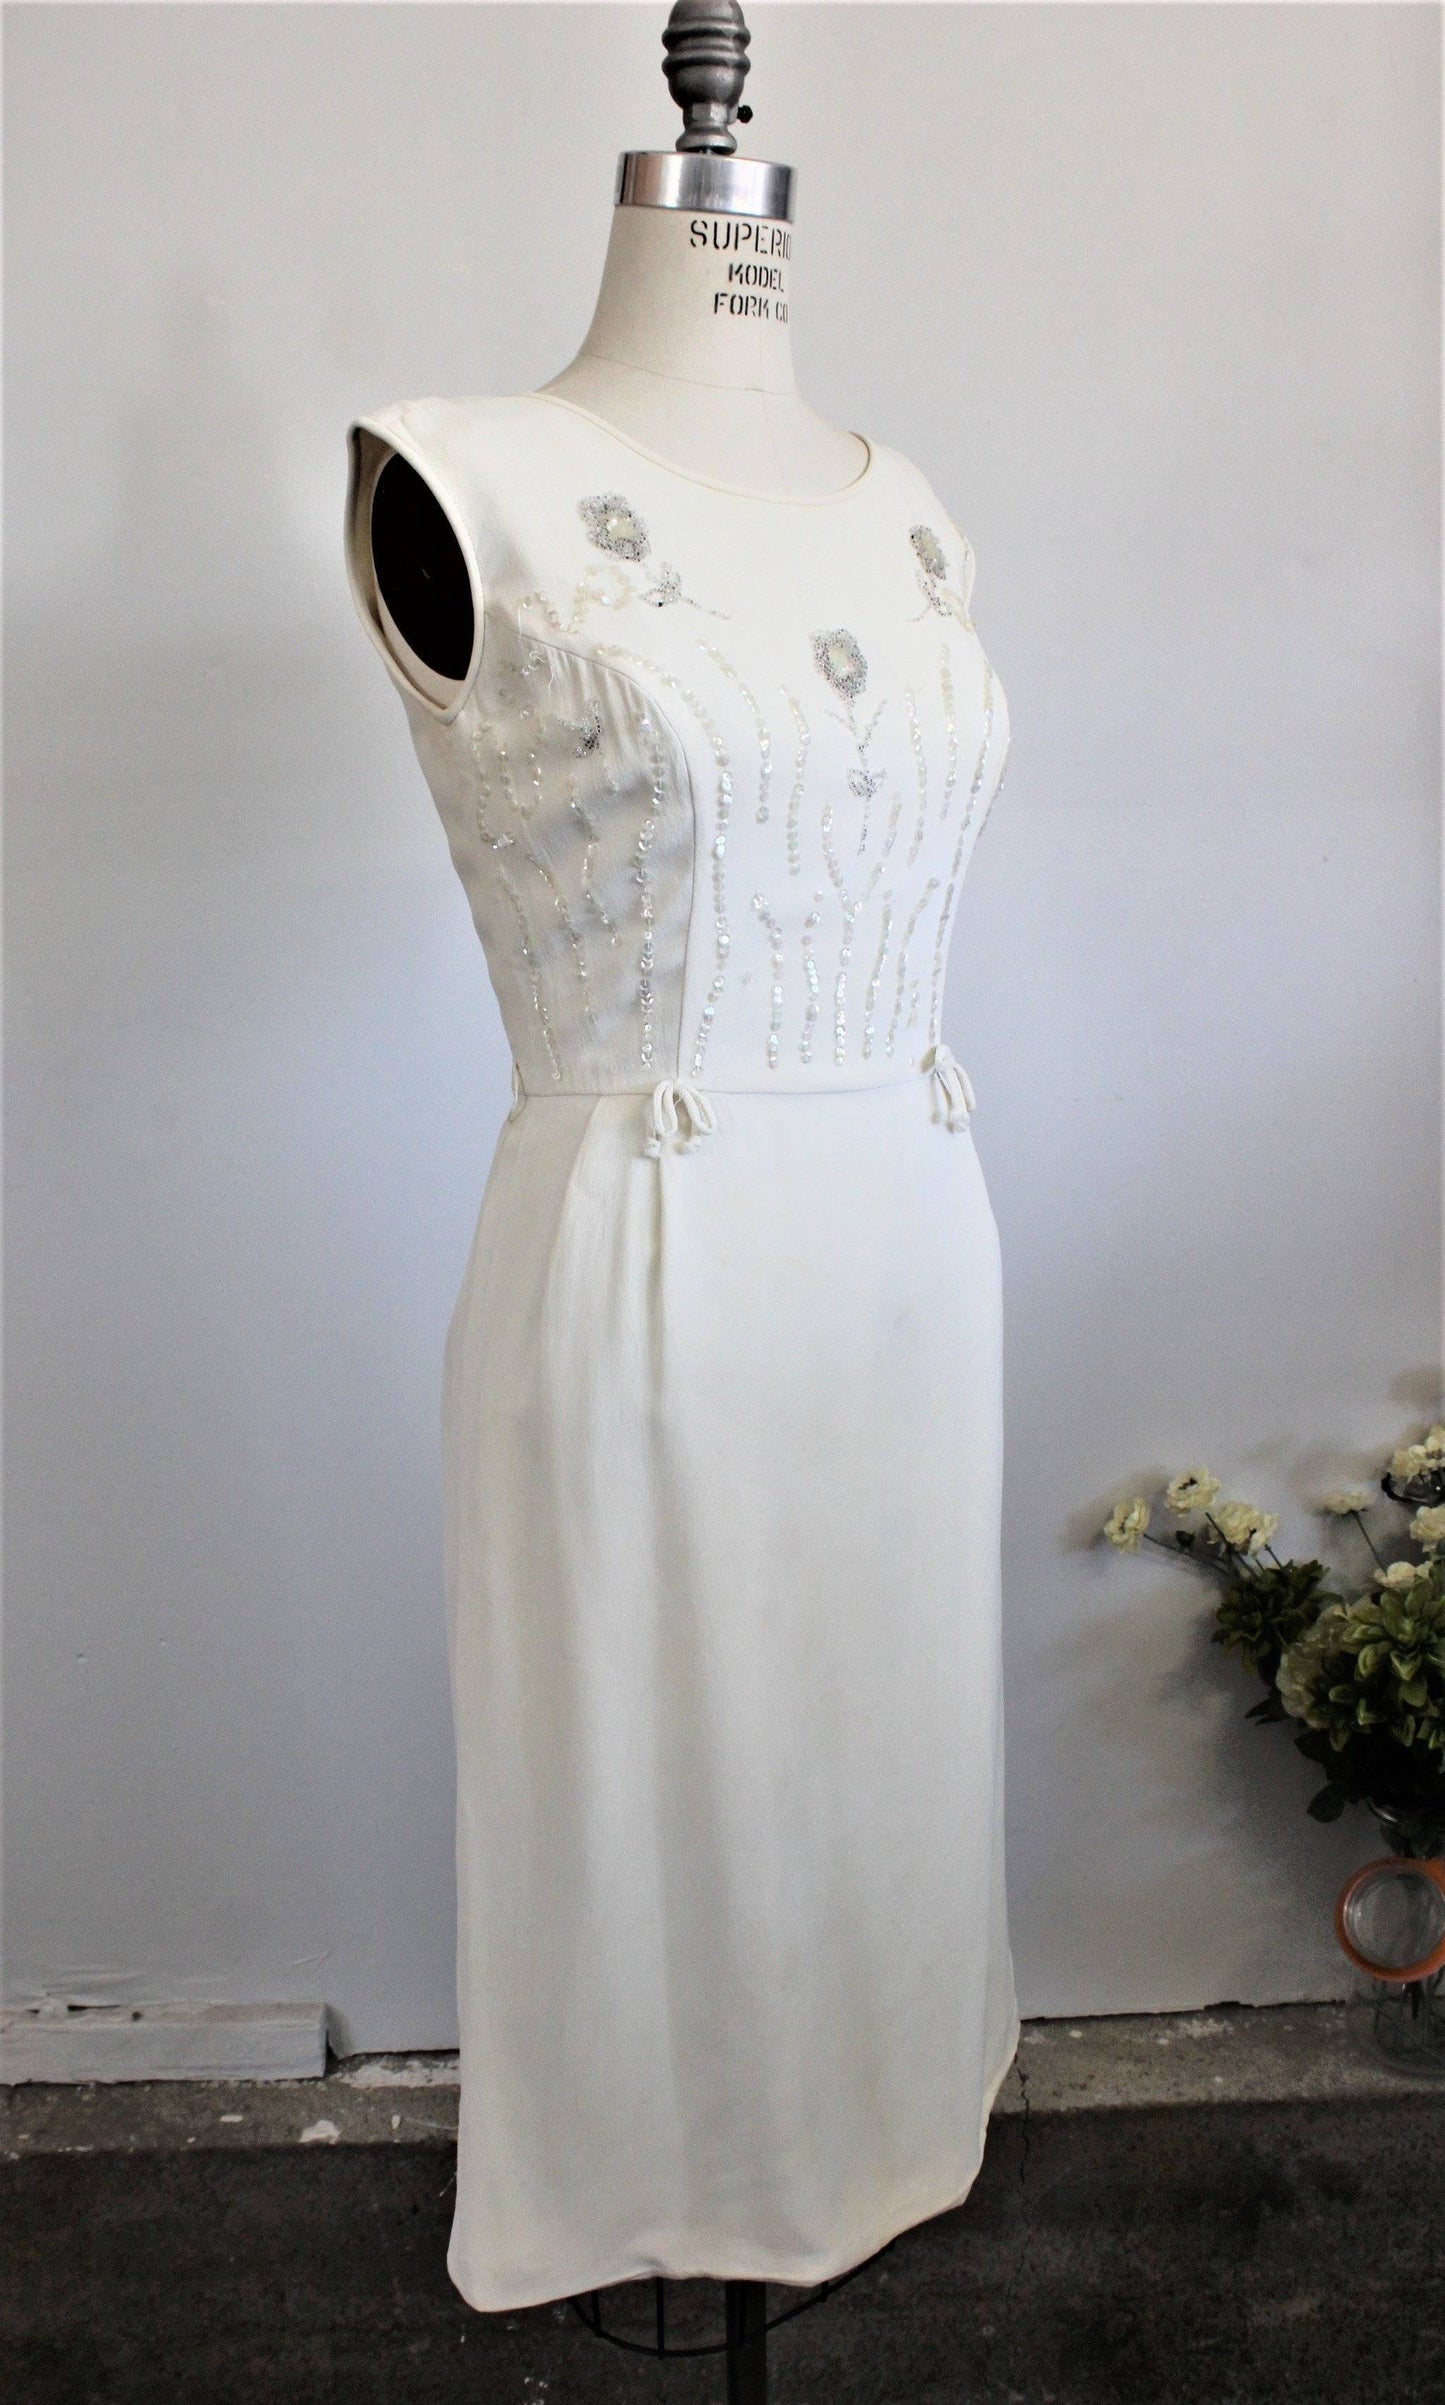 Vintage 1960s White Beaded Wiggle Dress With Sequins-Toadstool Farm Vintage-1960s Dress,1960s Mod Dress,Metal Zipper,Sequins,Vintage,Vintage Clothing,Vintage Cocktail Dress,Vintage Dress,Vintage Dresses,Wedding DRess,White Beaded Dress,Wiggle Dress